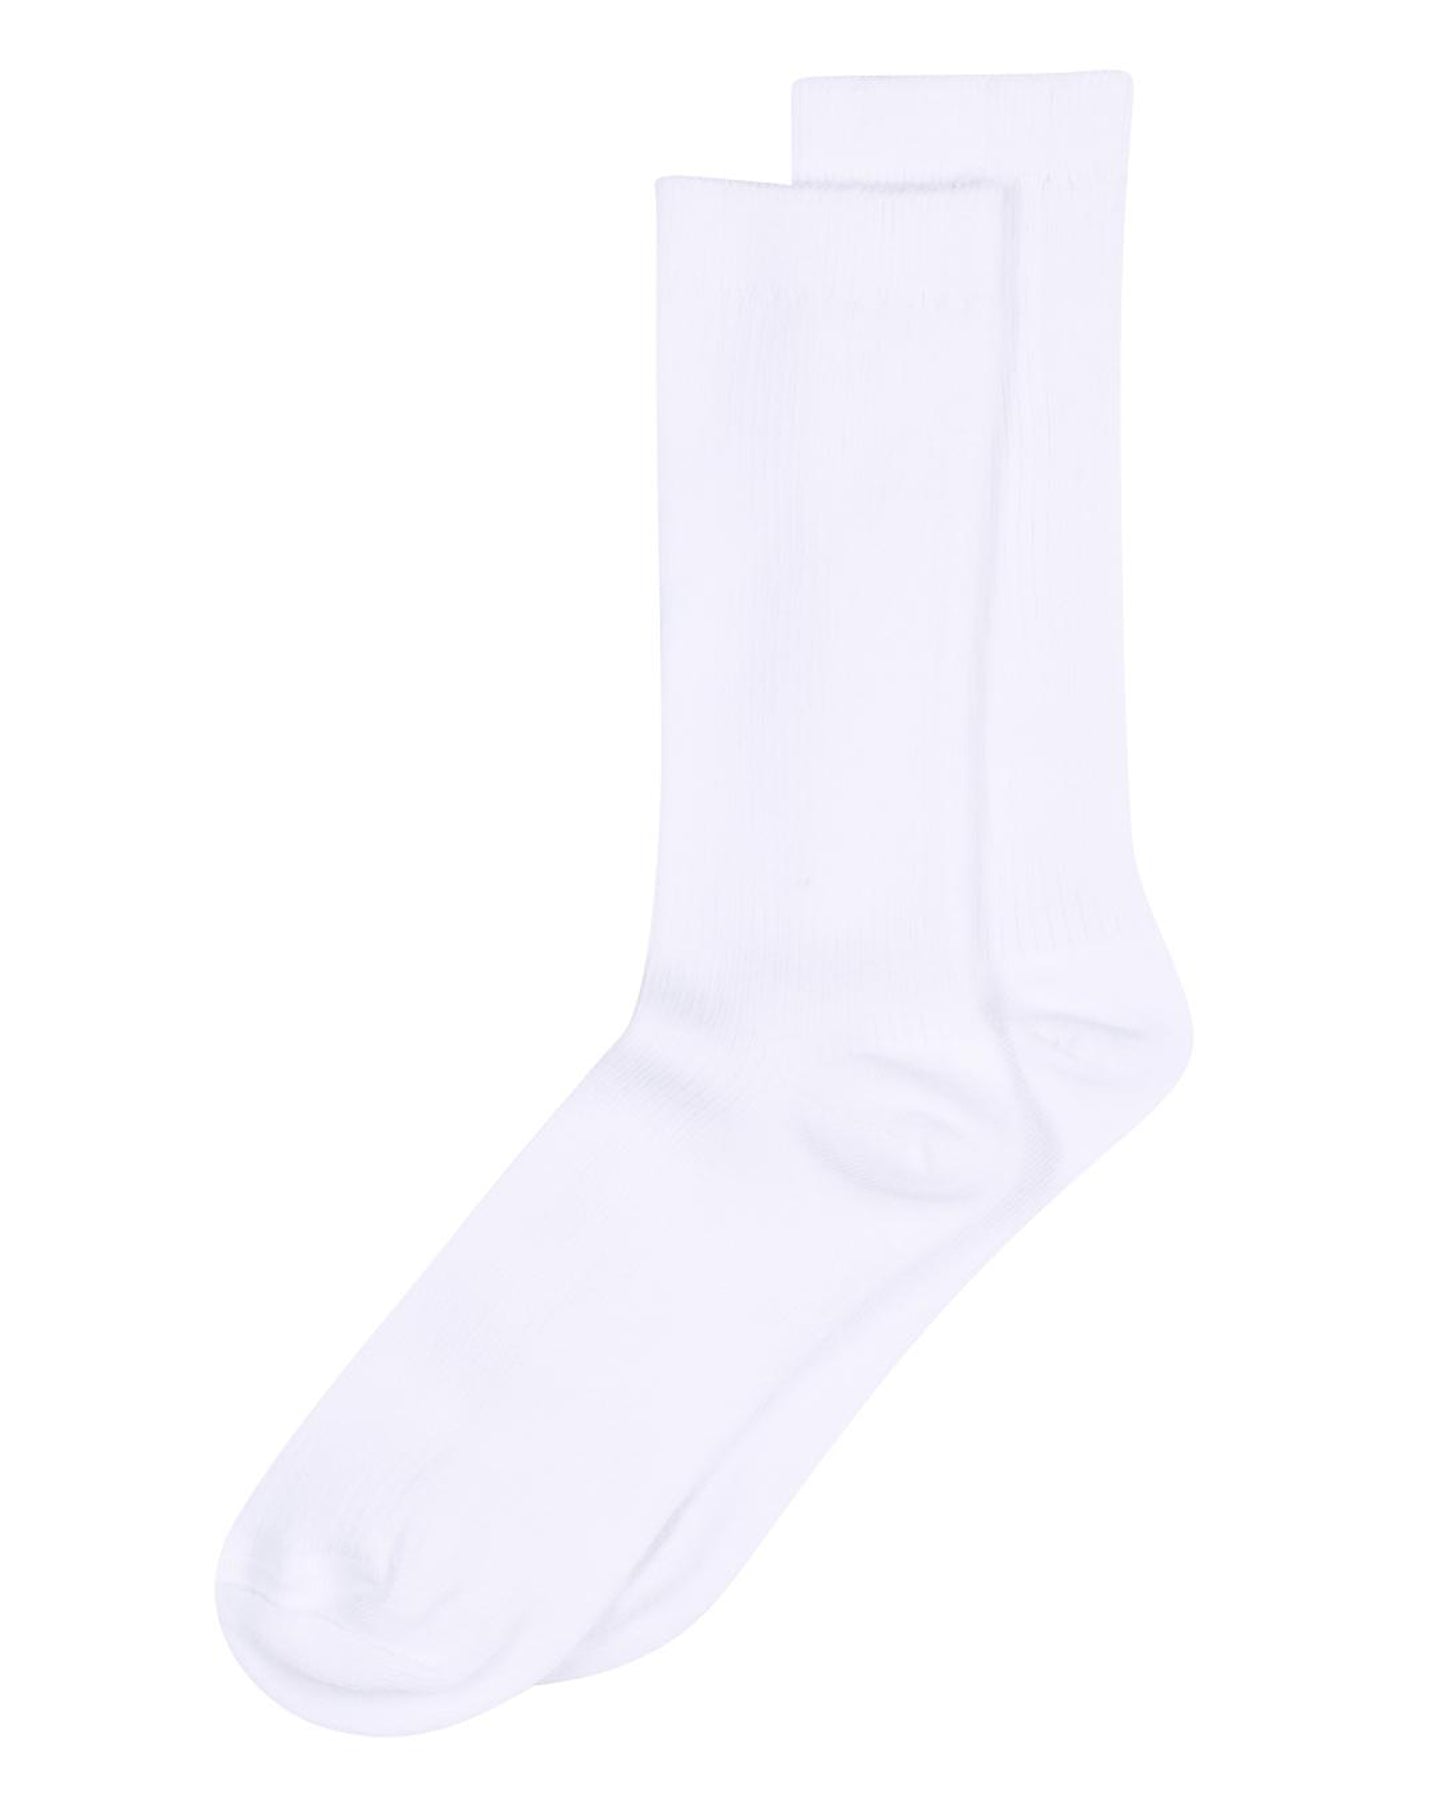 MP Denmark Fine Cotton Rib Sock - Soft and light white ribbed cotton crew length ankle socks with plain cuff, plain sole, shaped heel and flat toe seam.